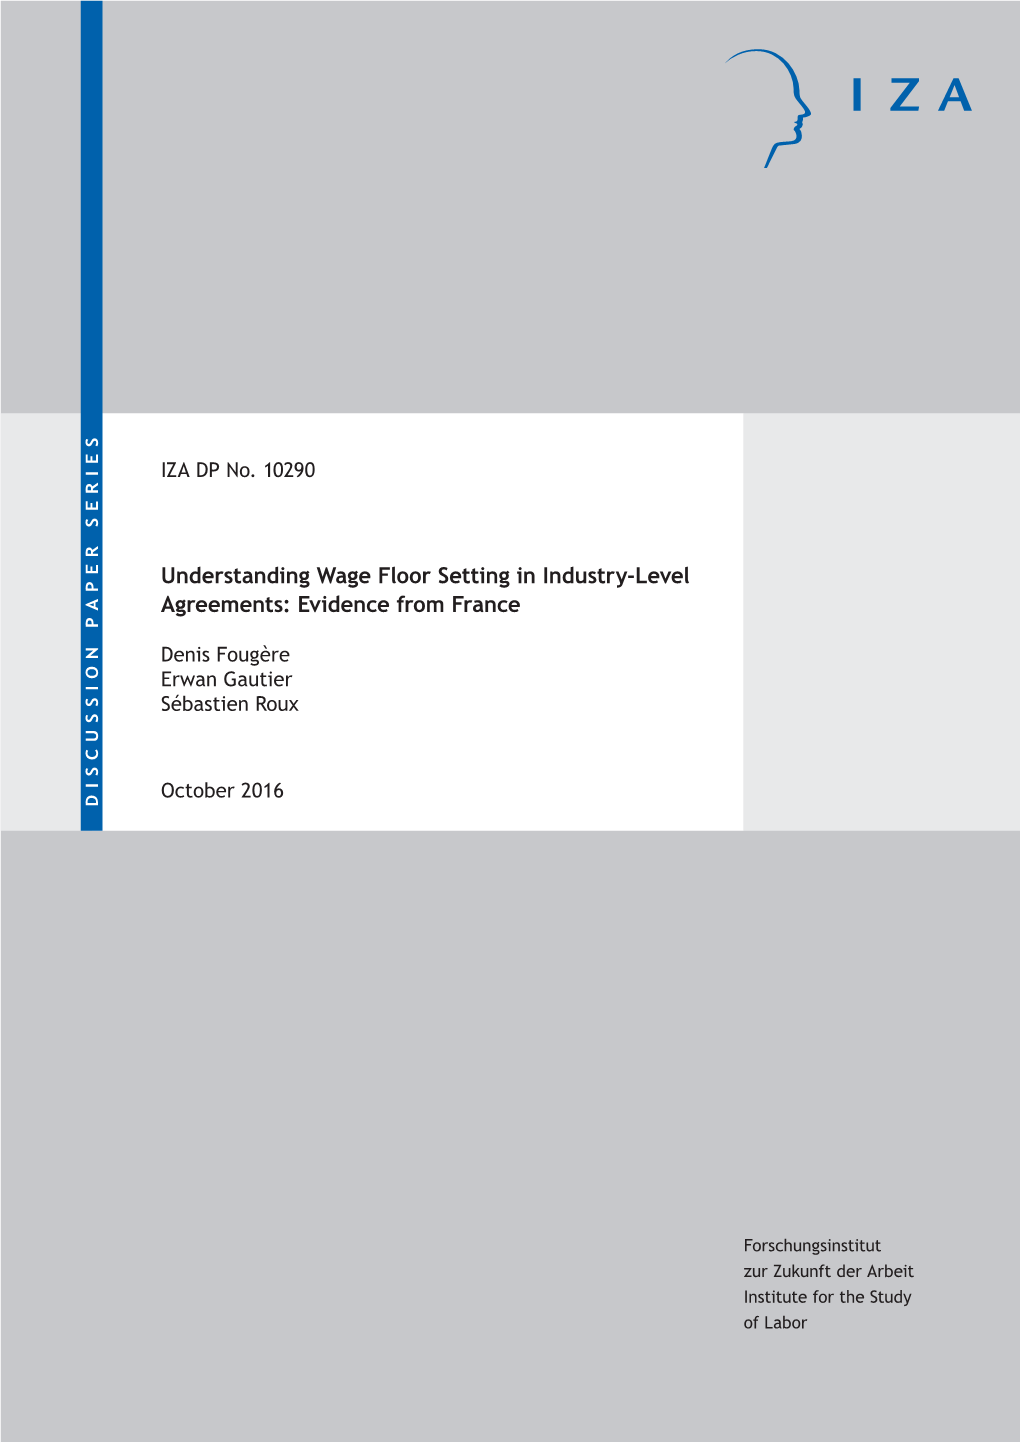 Understanding Wage Floor Setting in Industry-Level Agreements: Evidence from France